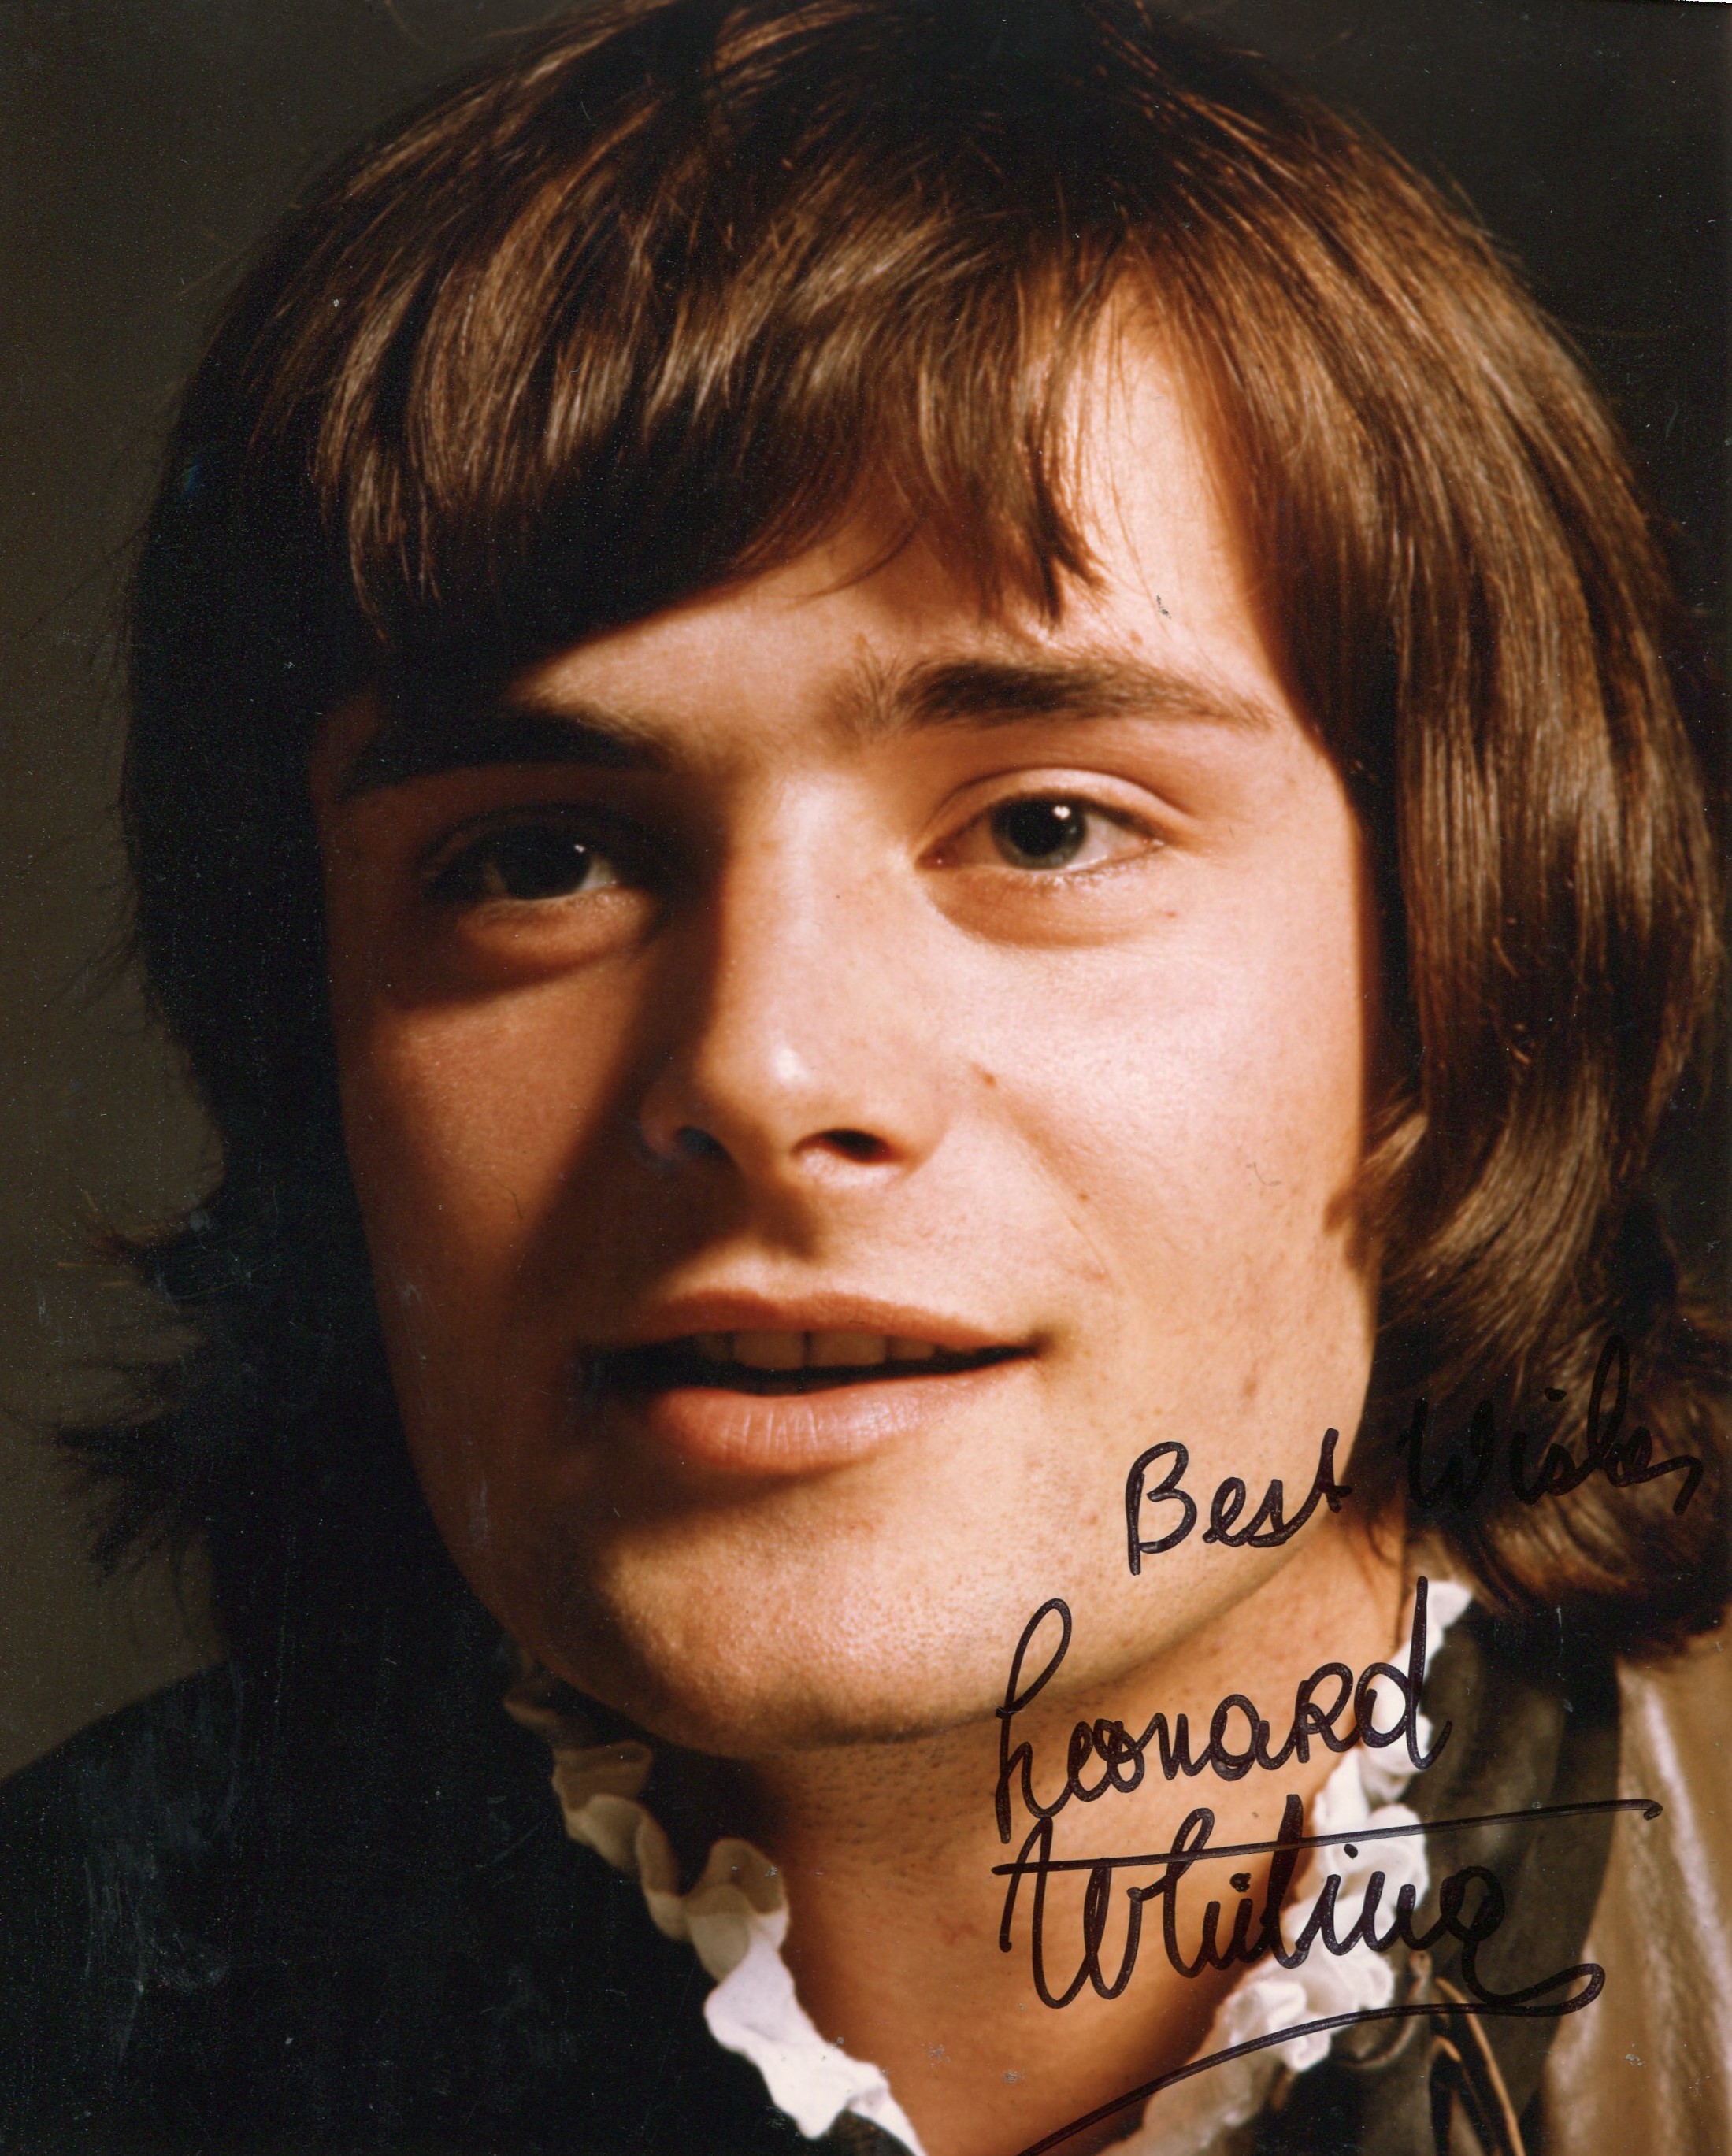 Leonard Whiting - Movies & Autographed Portraits Through The Decades.